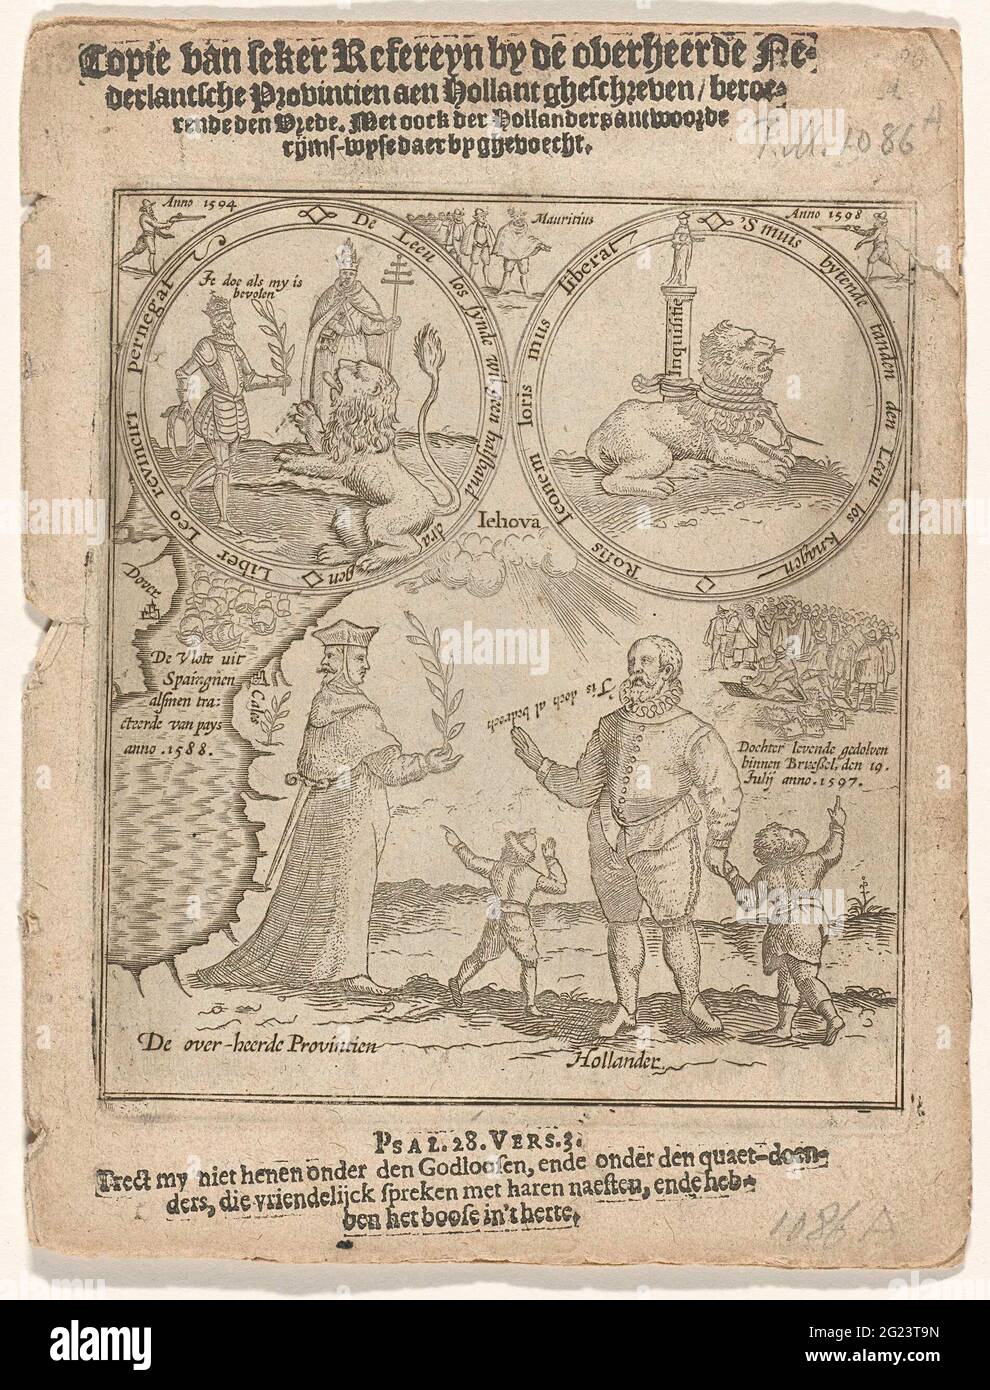 Title page of the leaflet: Copie van Seker Refereyn by the dominated  Nederlanche Provintien Aen Hollant Ghehère / Running peace. With Oock of  Hollanders responded Rijms-Wyse Daer by Ghevoecht, 1598. Allegory on